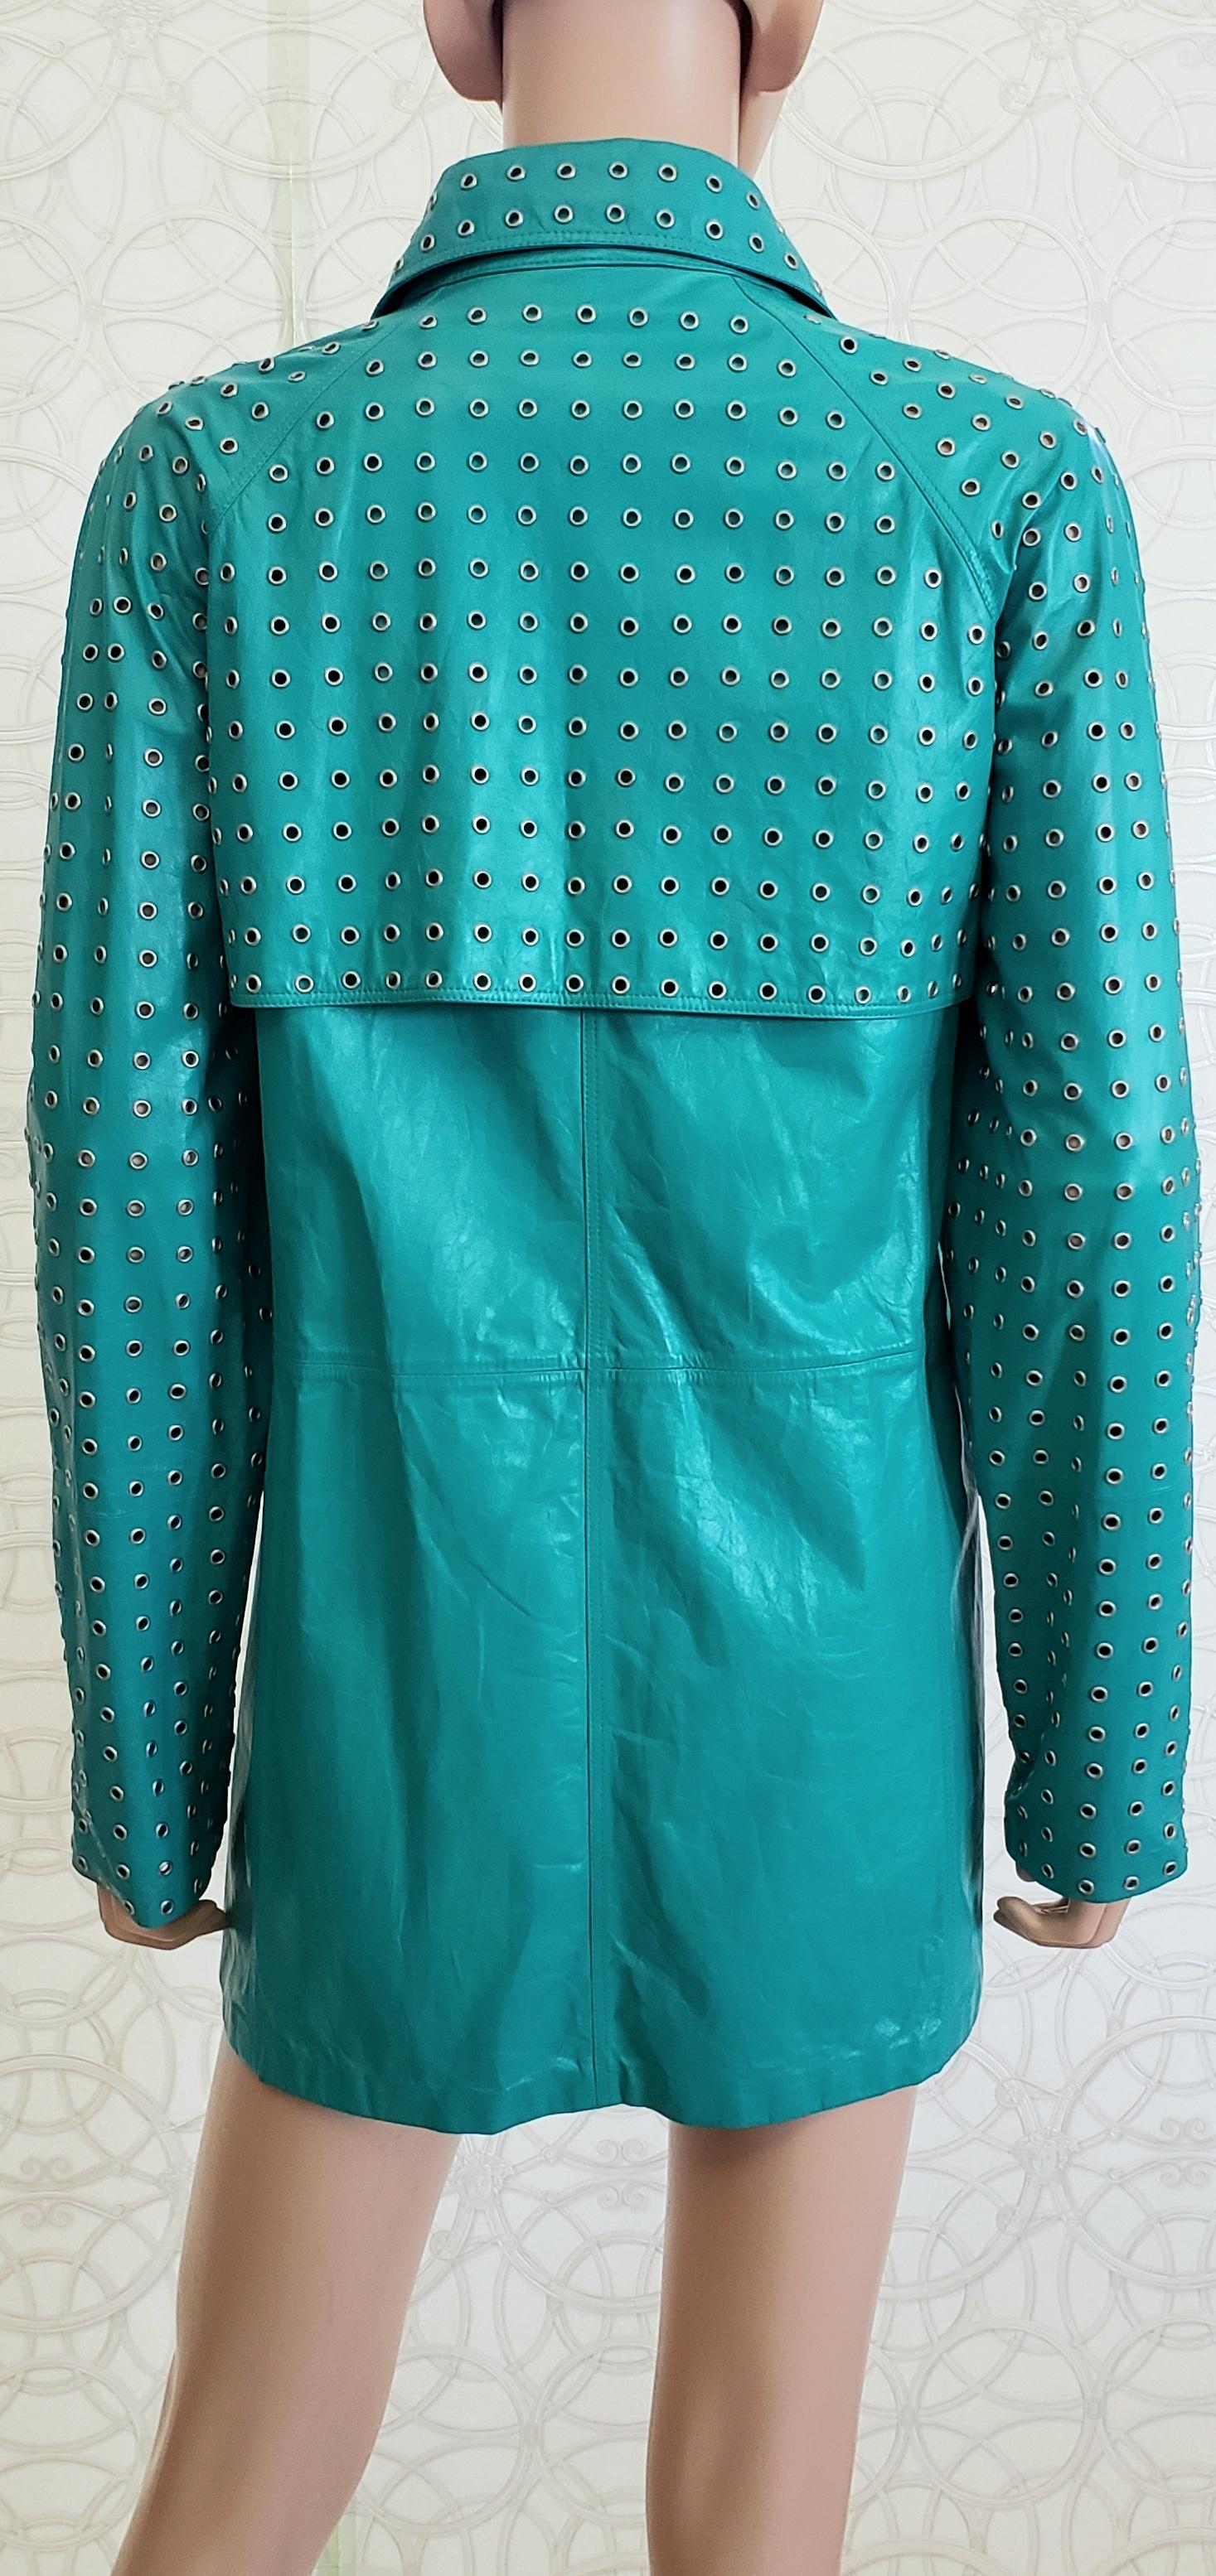 NEW GIANNI VERSACE EMERALD GREEN LEATHER JACKET with RIVETS Sz IT 40 - US 4/6 For Sale 2